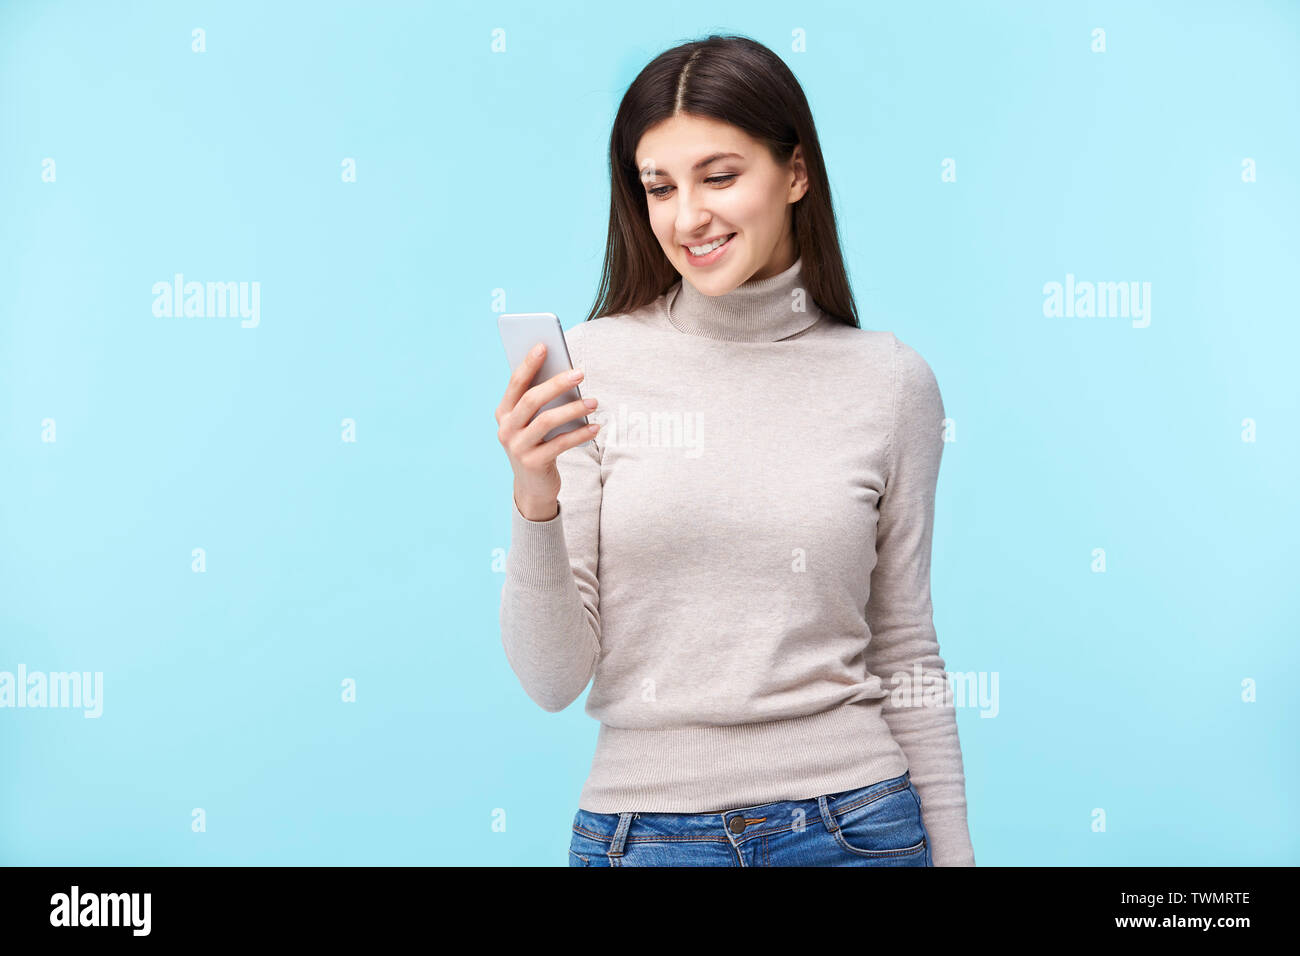 beautiful young caucasian woman looking at mobile phone, happy and smiling, isolated on blue background. Stock Photo